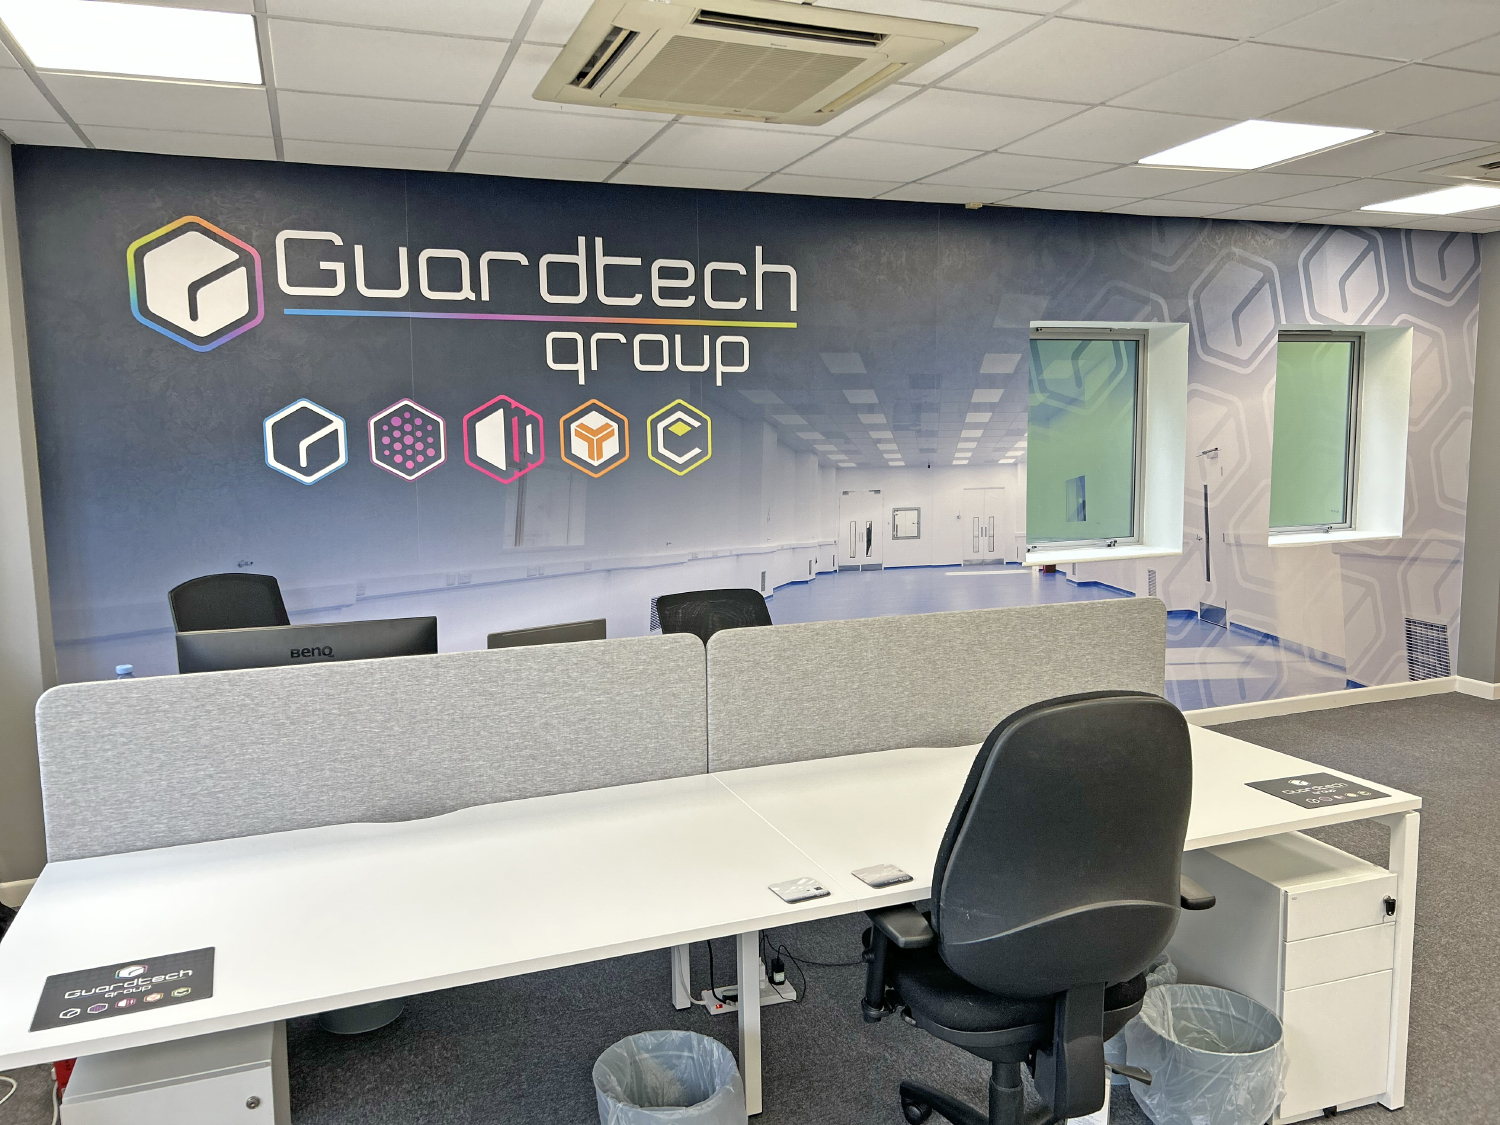 Cleanroom construction expert Guardtech Group upgrades to new HQ